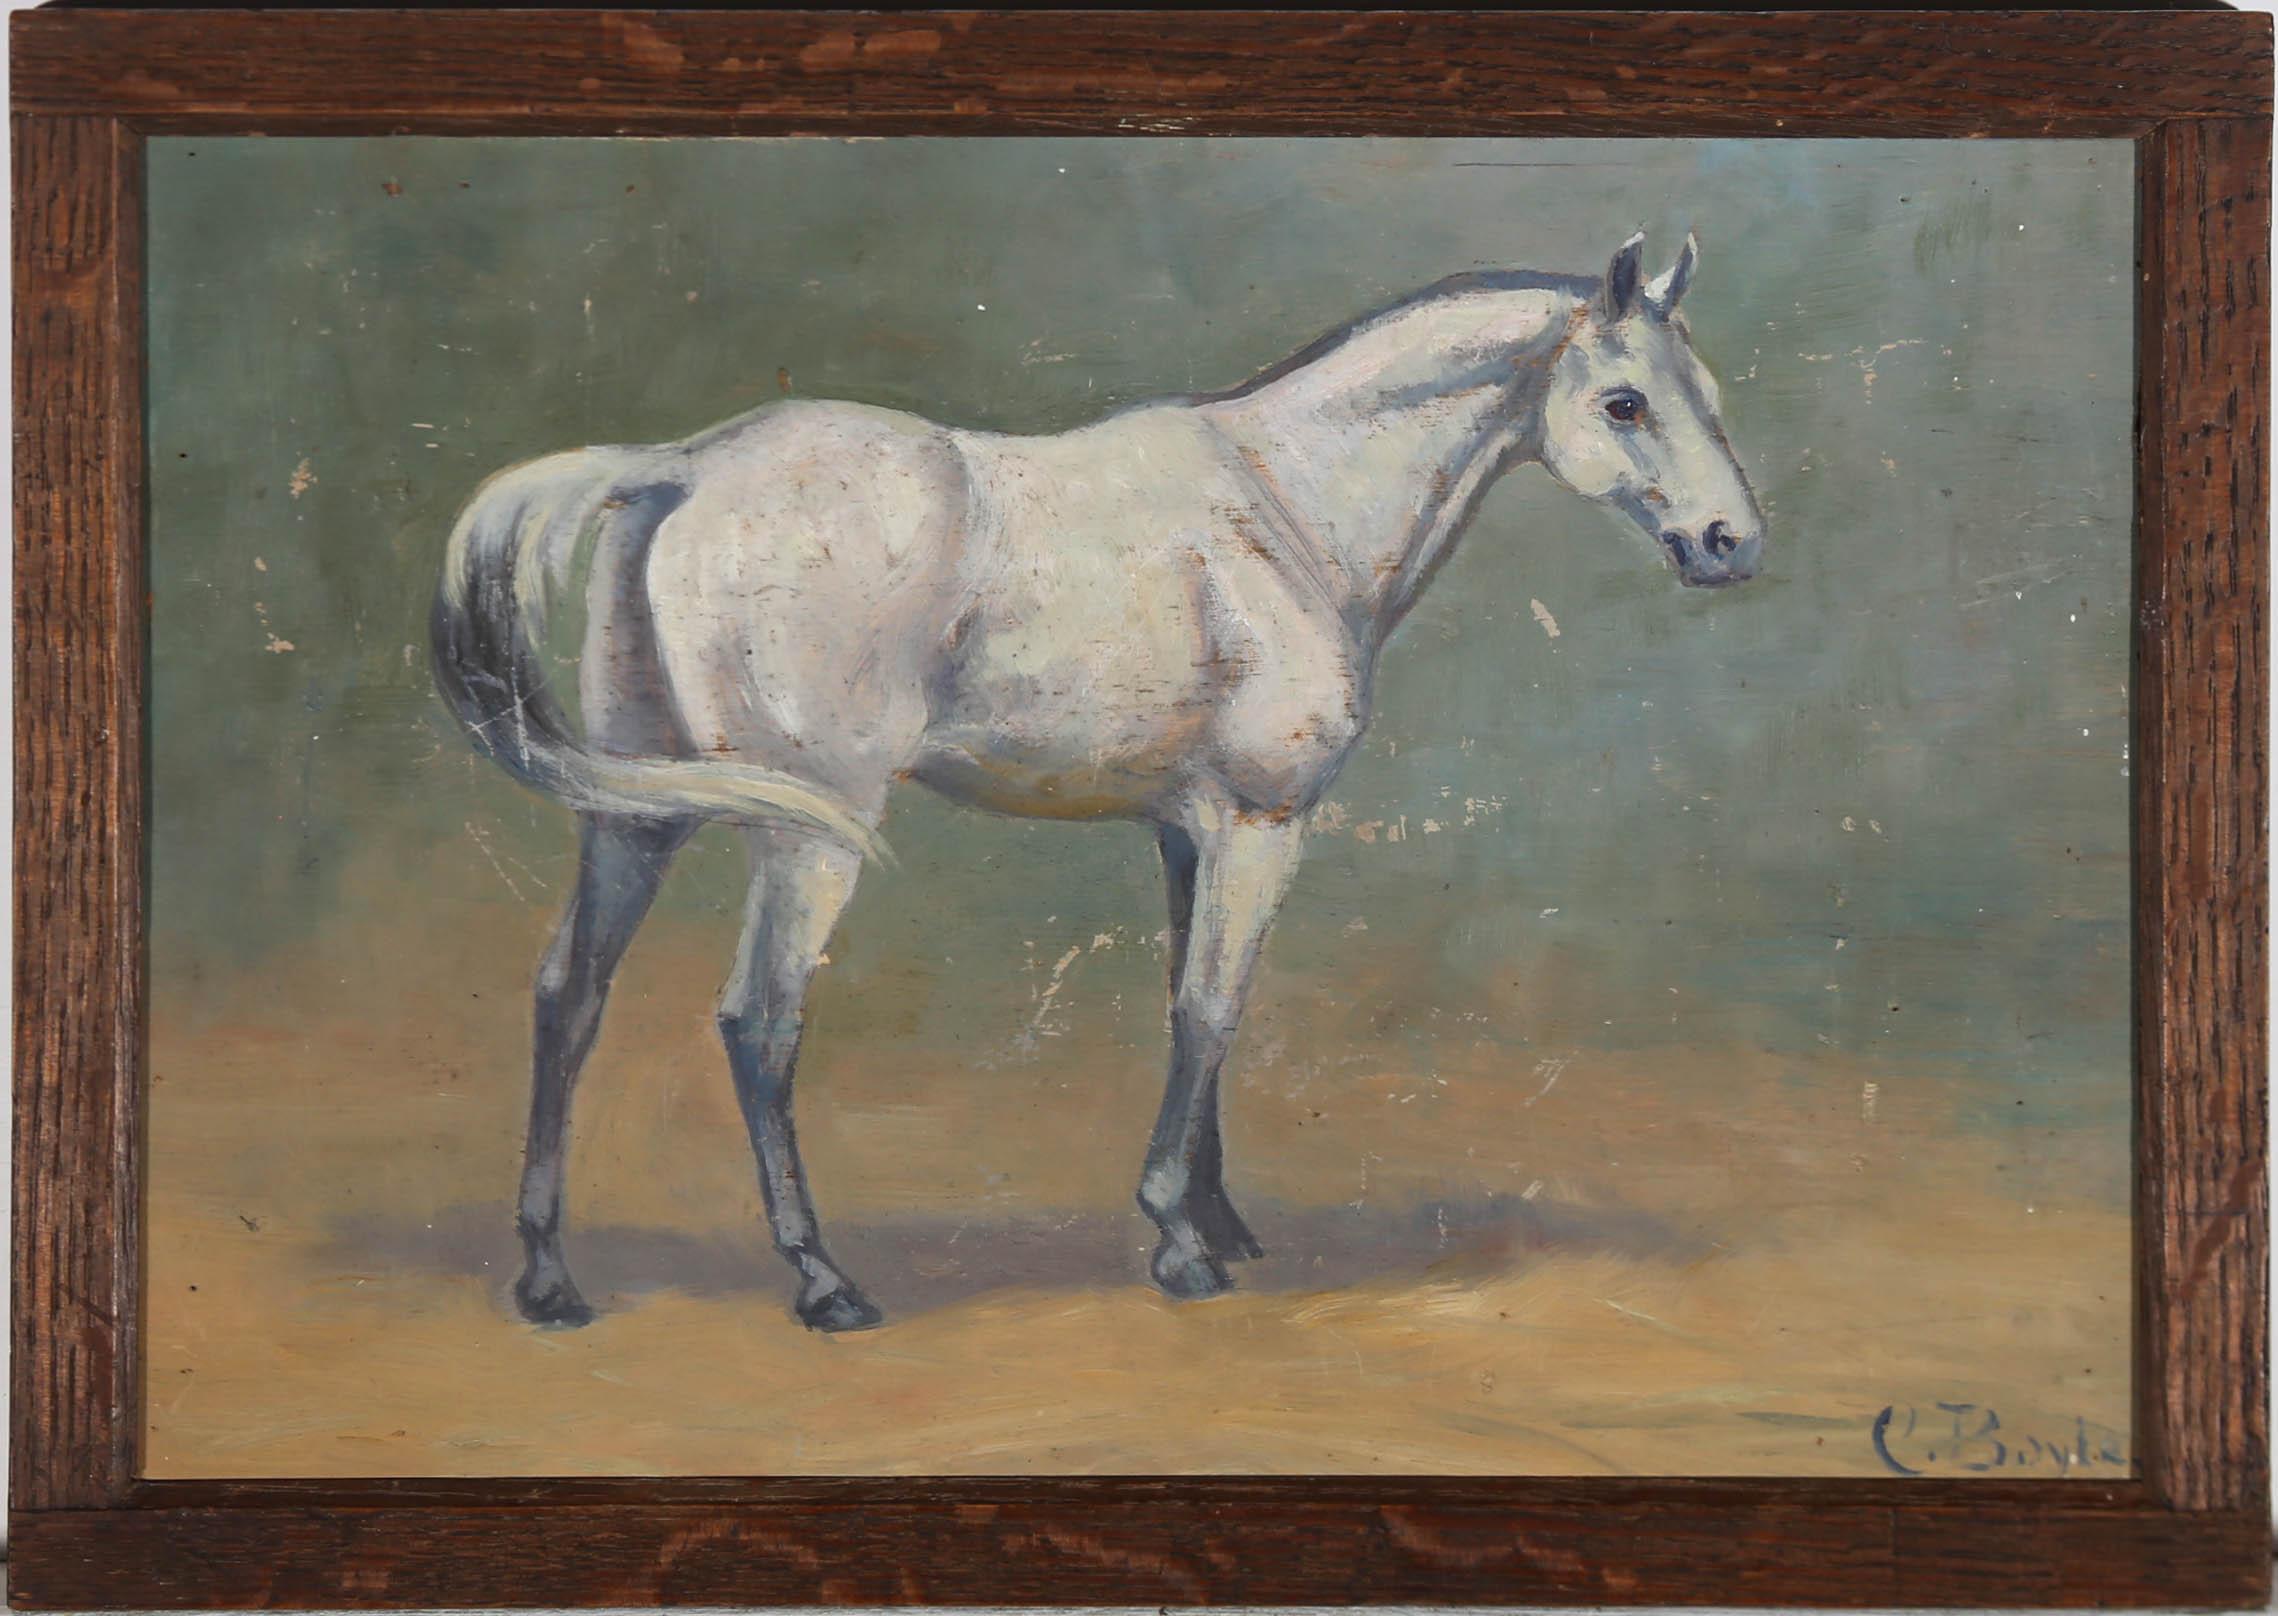 A charming study of a grey horse, painted by equine artist Cerise Boyle (1875-1951). The oil has been signed to the lower right. Beautifully presented in a rustic wood frame. On wood panel. 